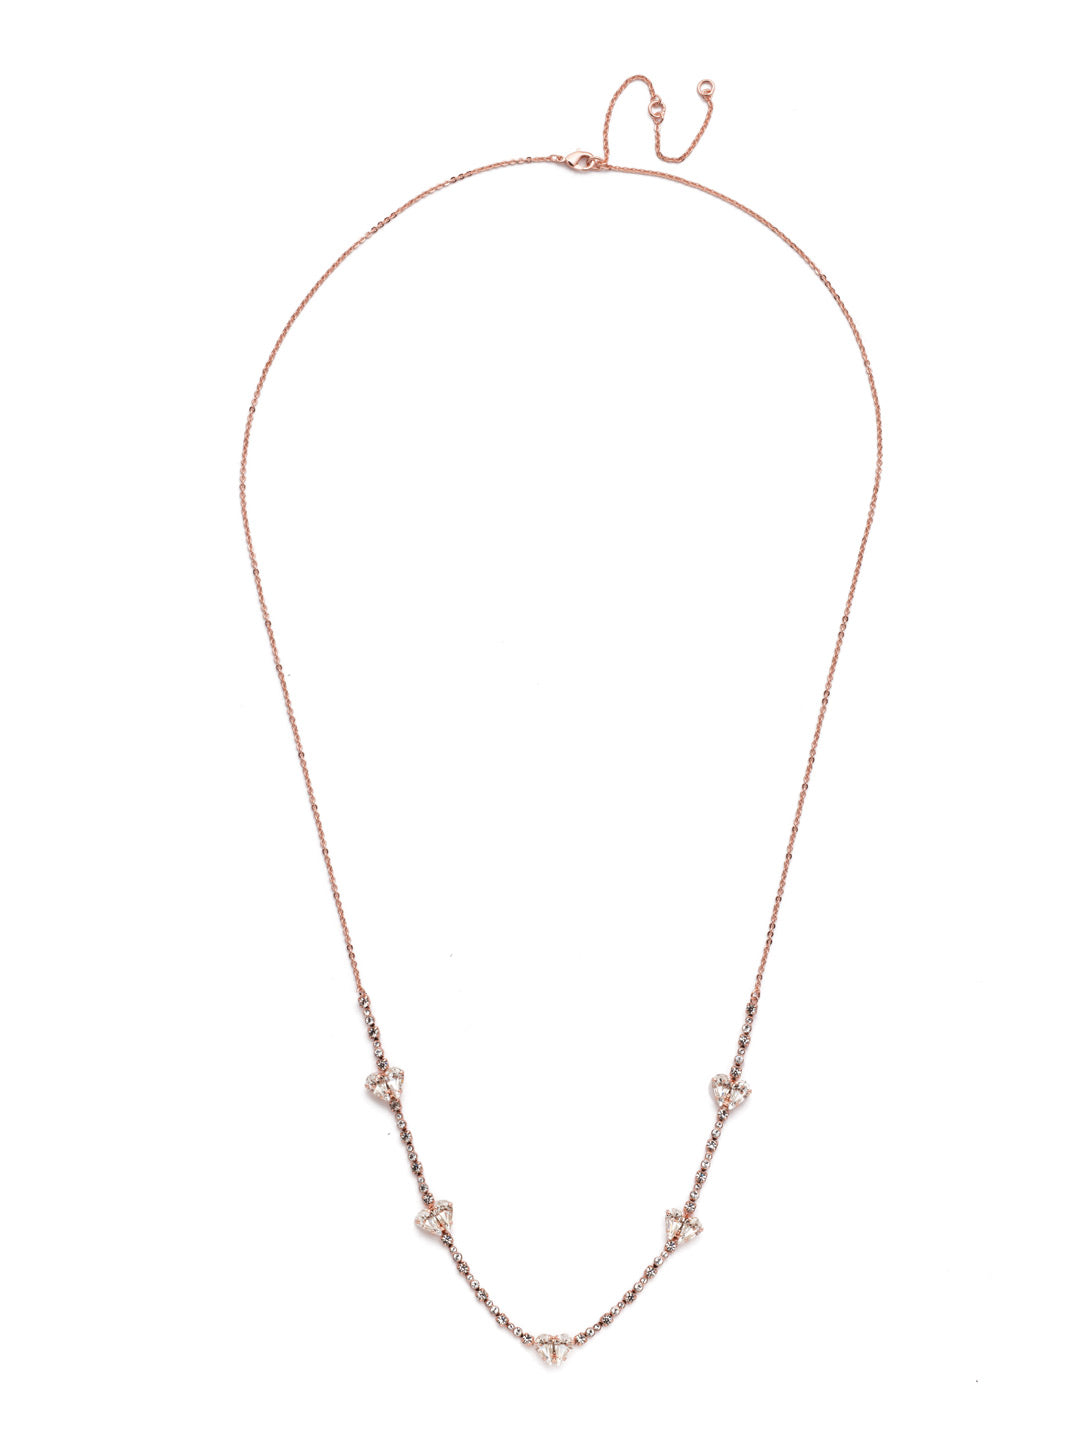 Petra Long Necklace - NER11RGCRY - <p>Layer on sparkling crystal hearts with the Petra Long Necklace. It sets the stage for a day of love. From Sorrelli's Crystal collection in our Rose Gold-tone finish.</p>